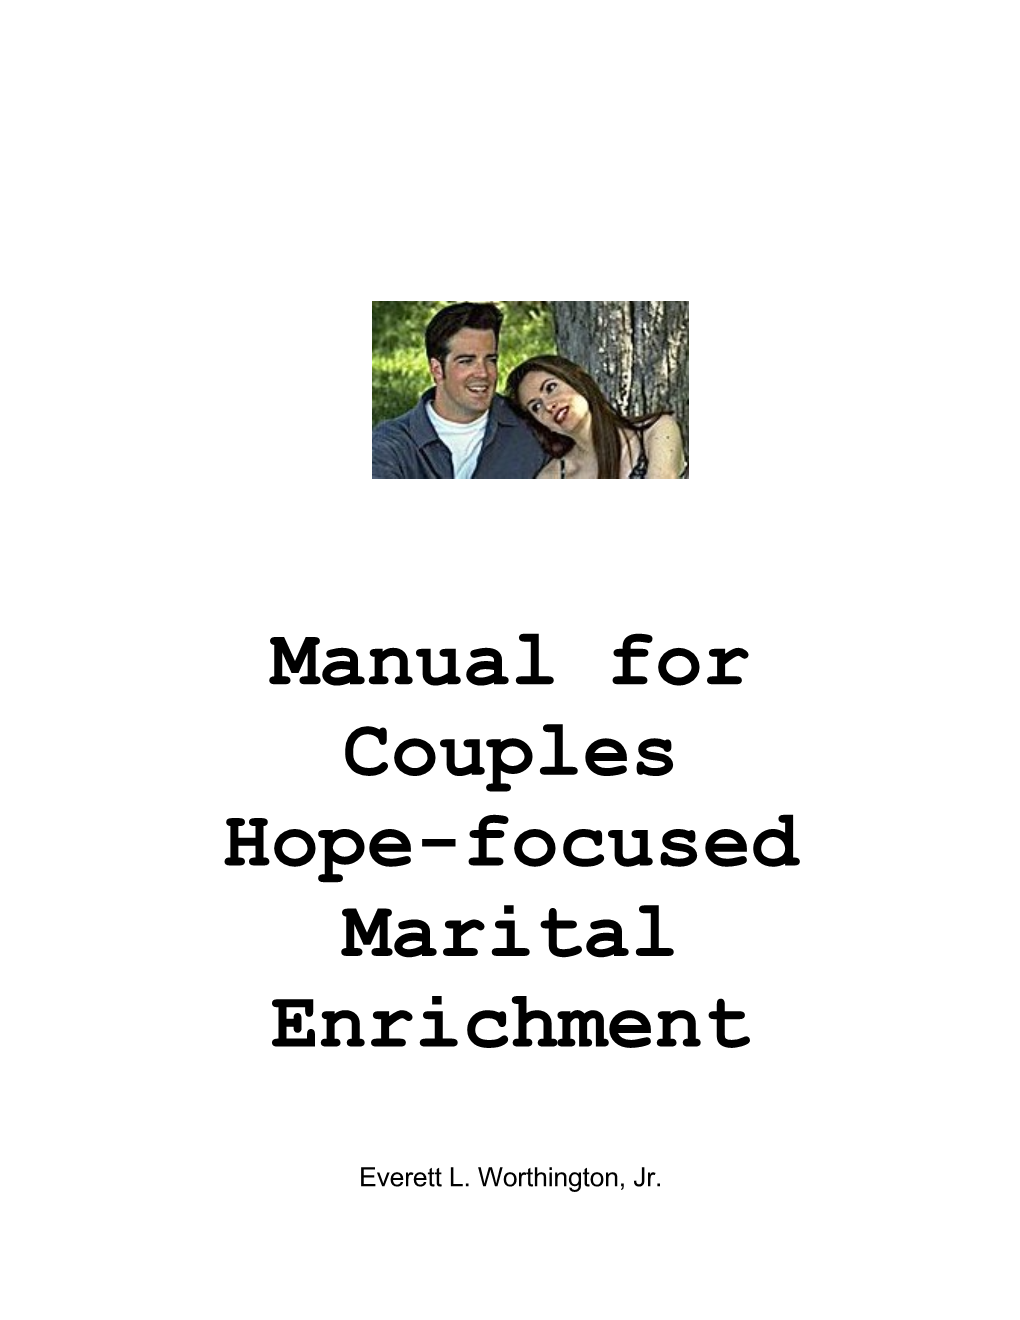 Manual for Couples